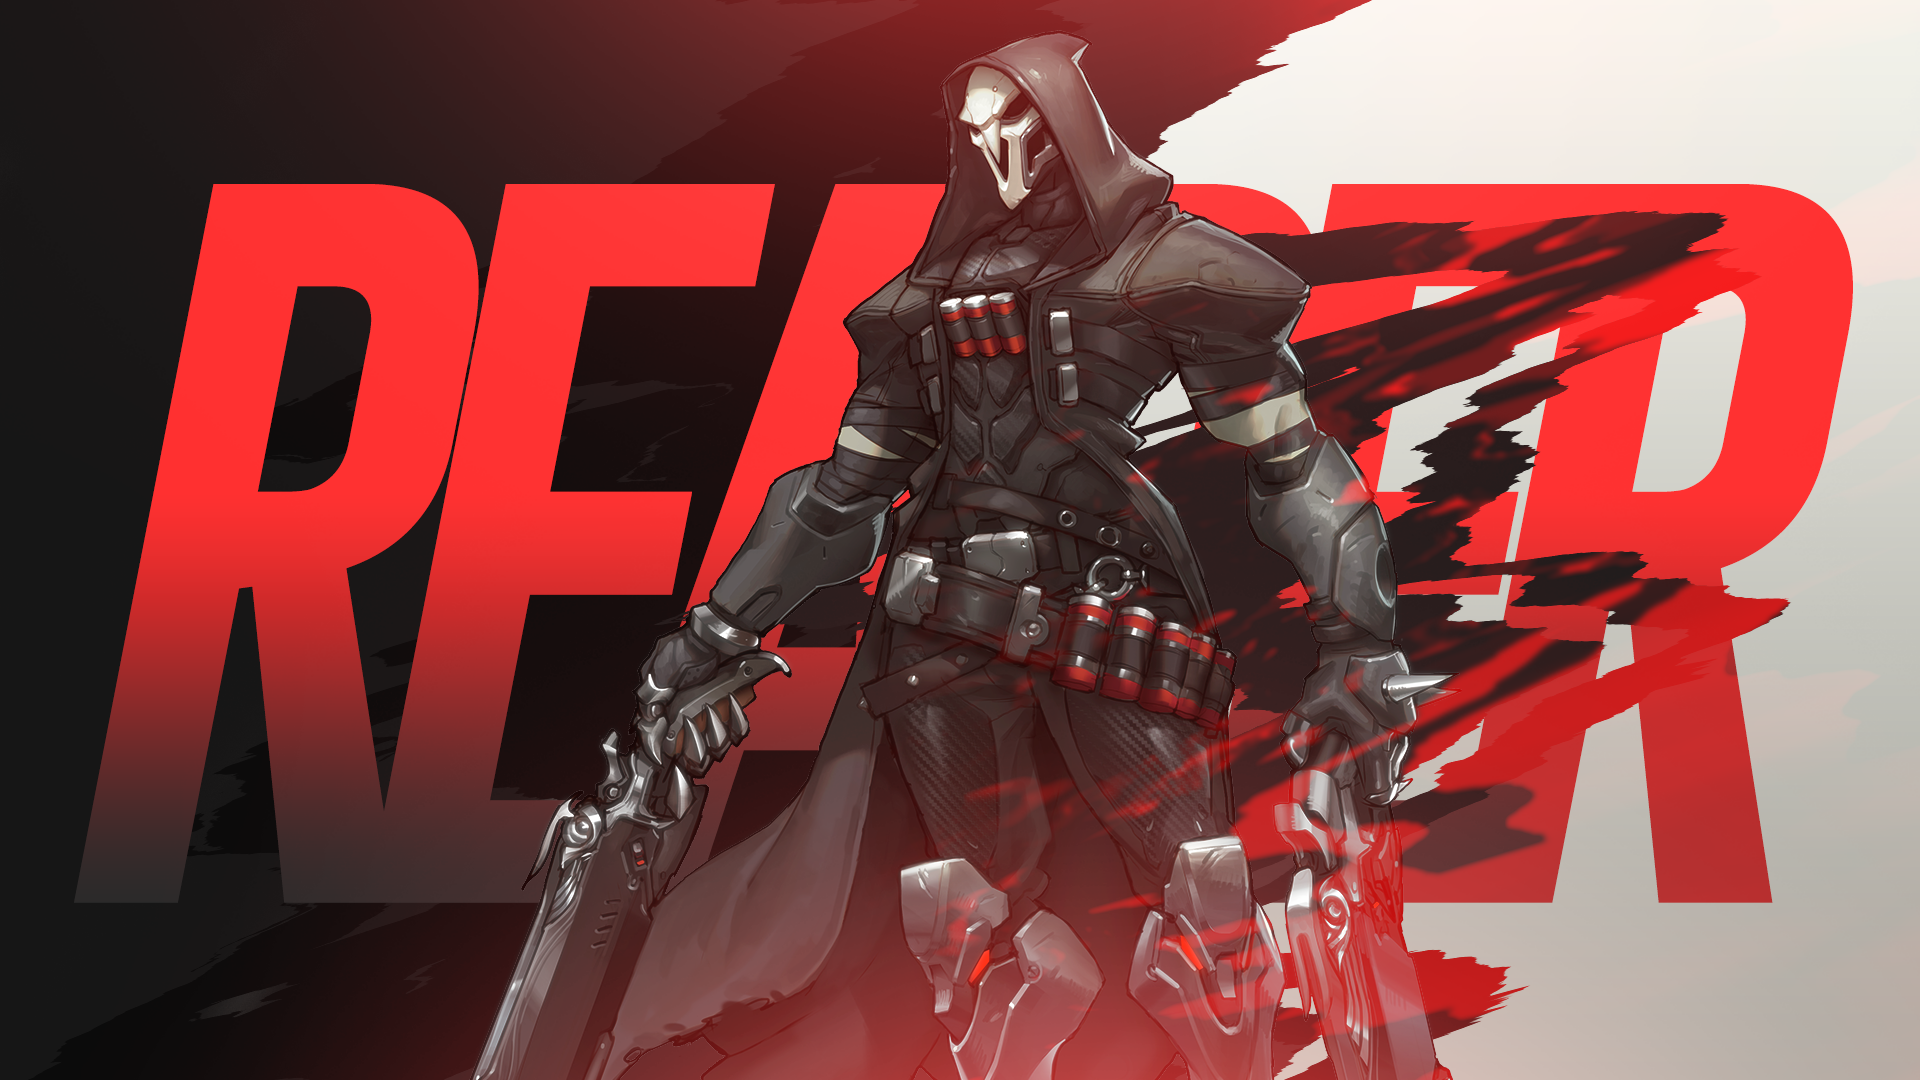 Overwatch   Reaper Wallpaper by MikoyaNx on